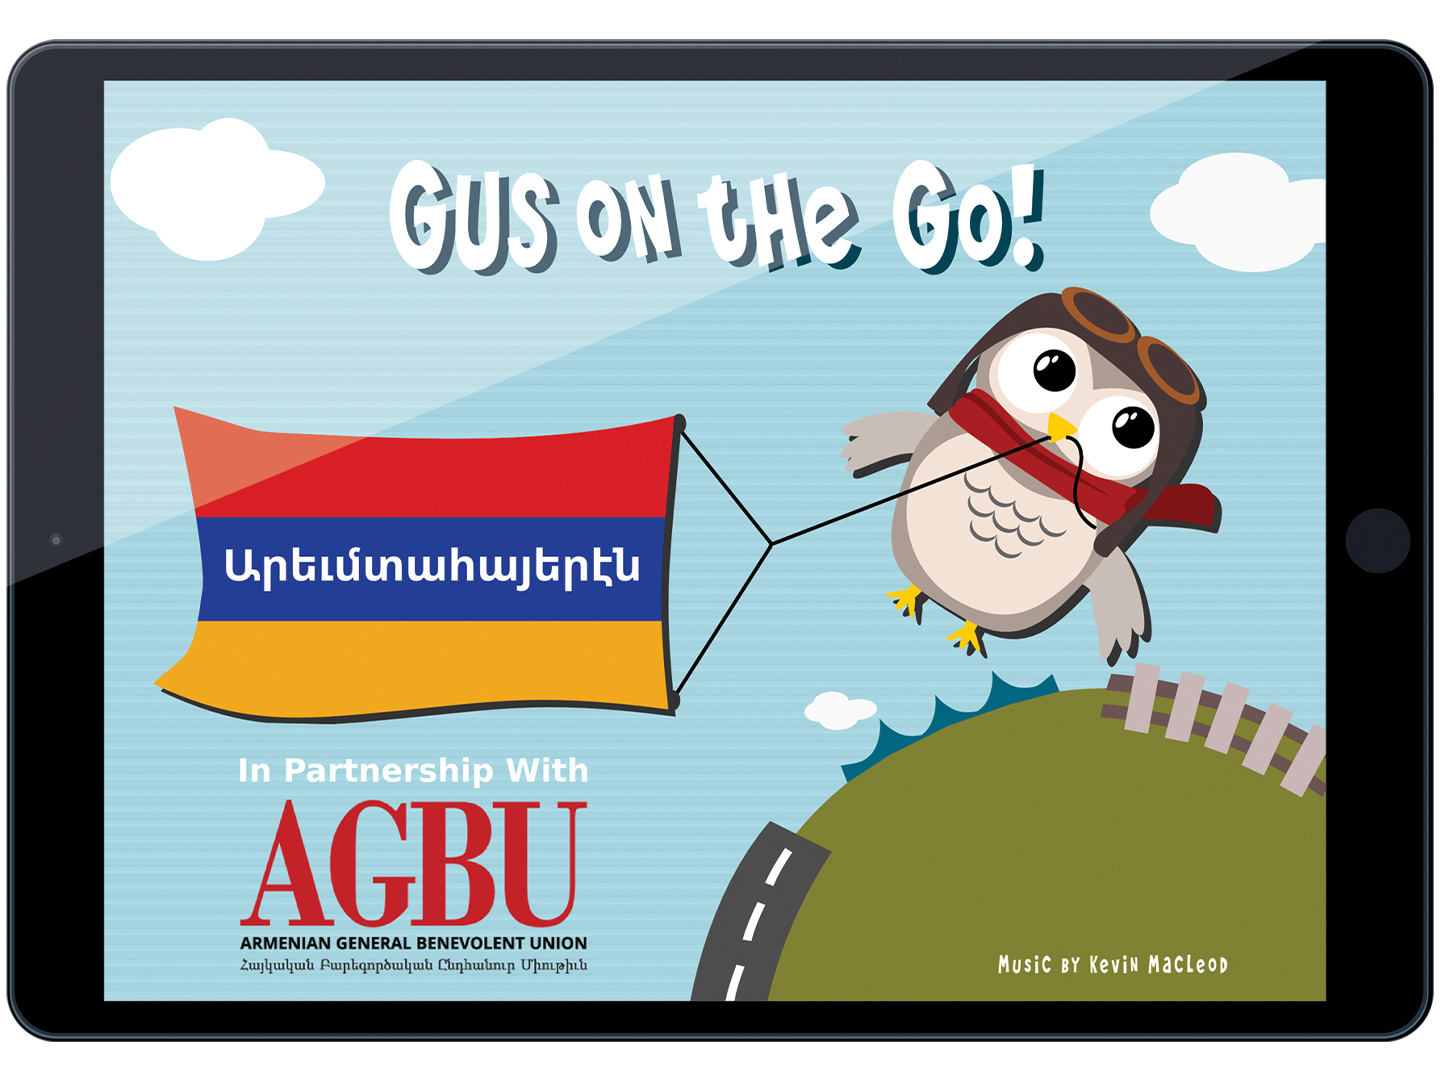 AGBU also offers a vocabulary app for young children called Gus on the Go, available in Eastern & Western Armenian.